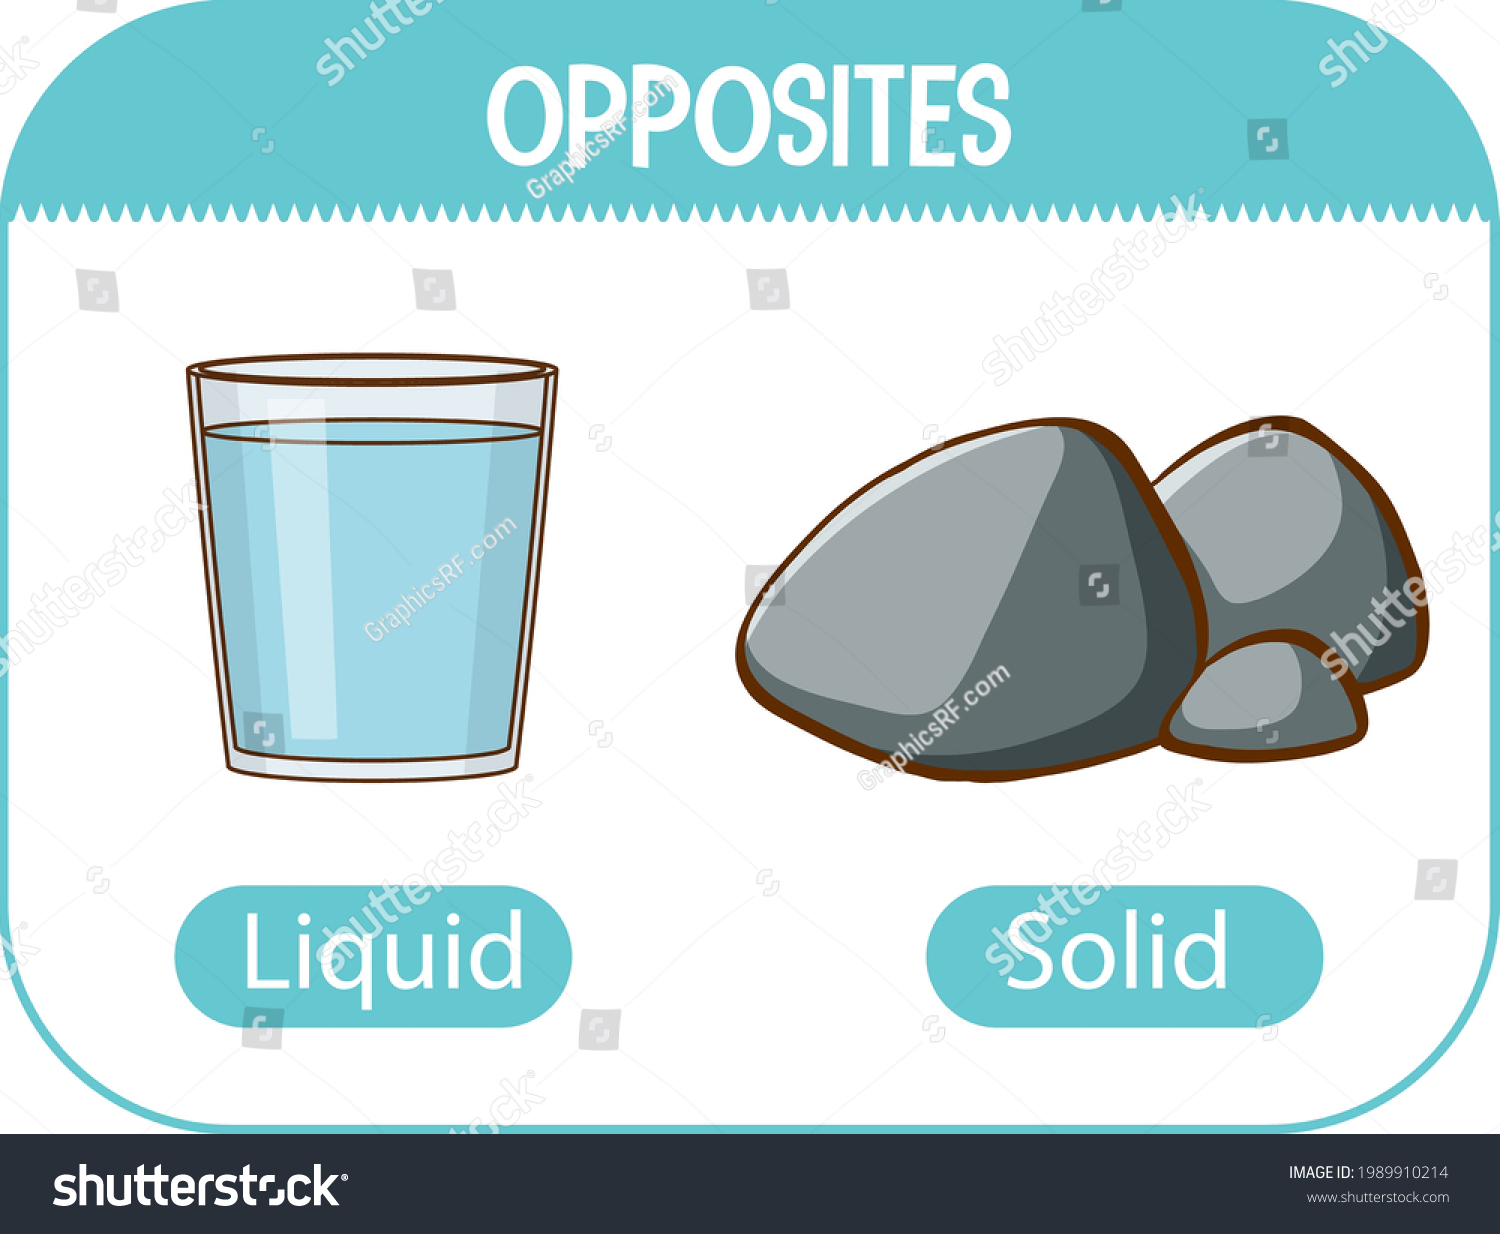 Opposite Words Liquid Solid Illustration Stock Vector (Royalty Free ...